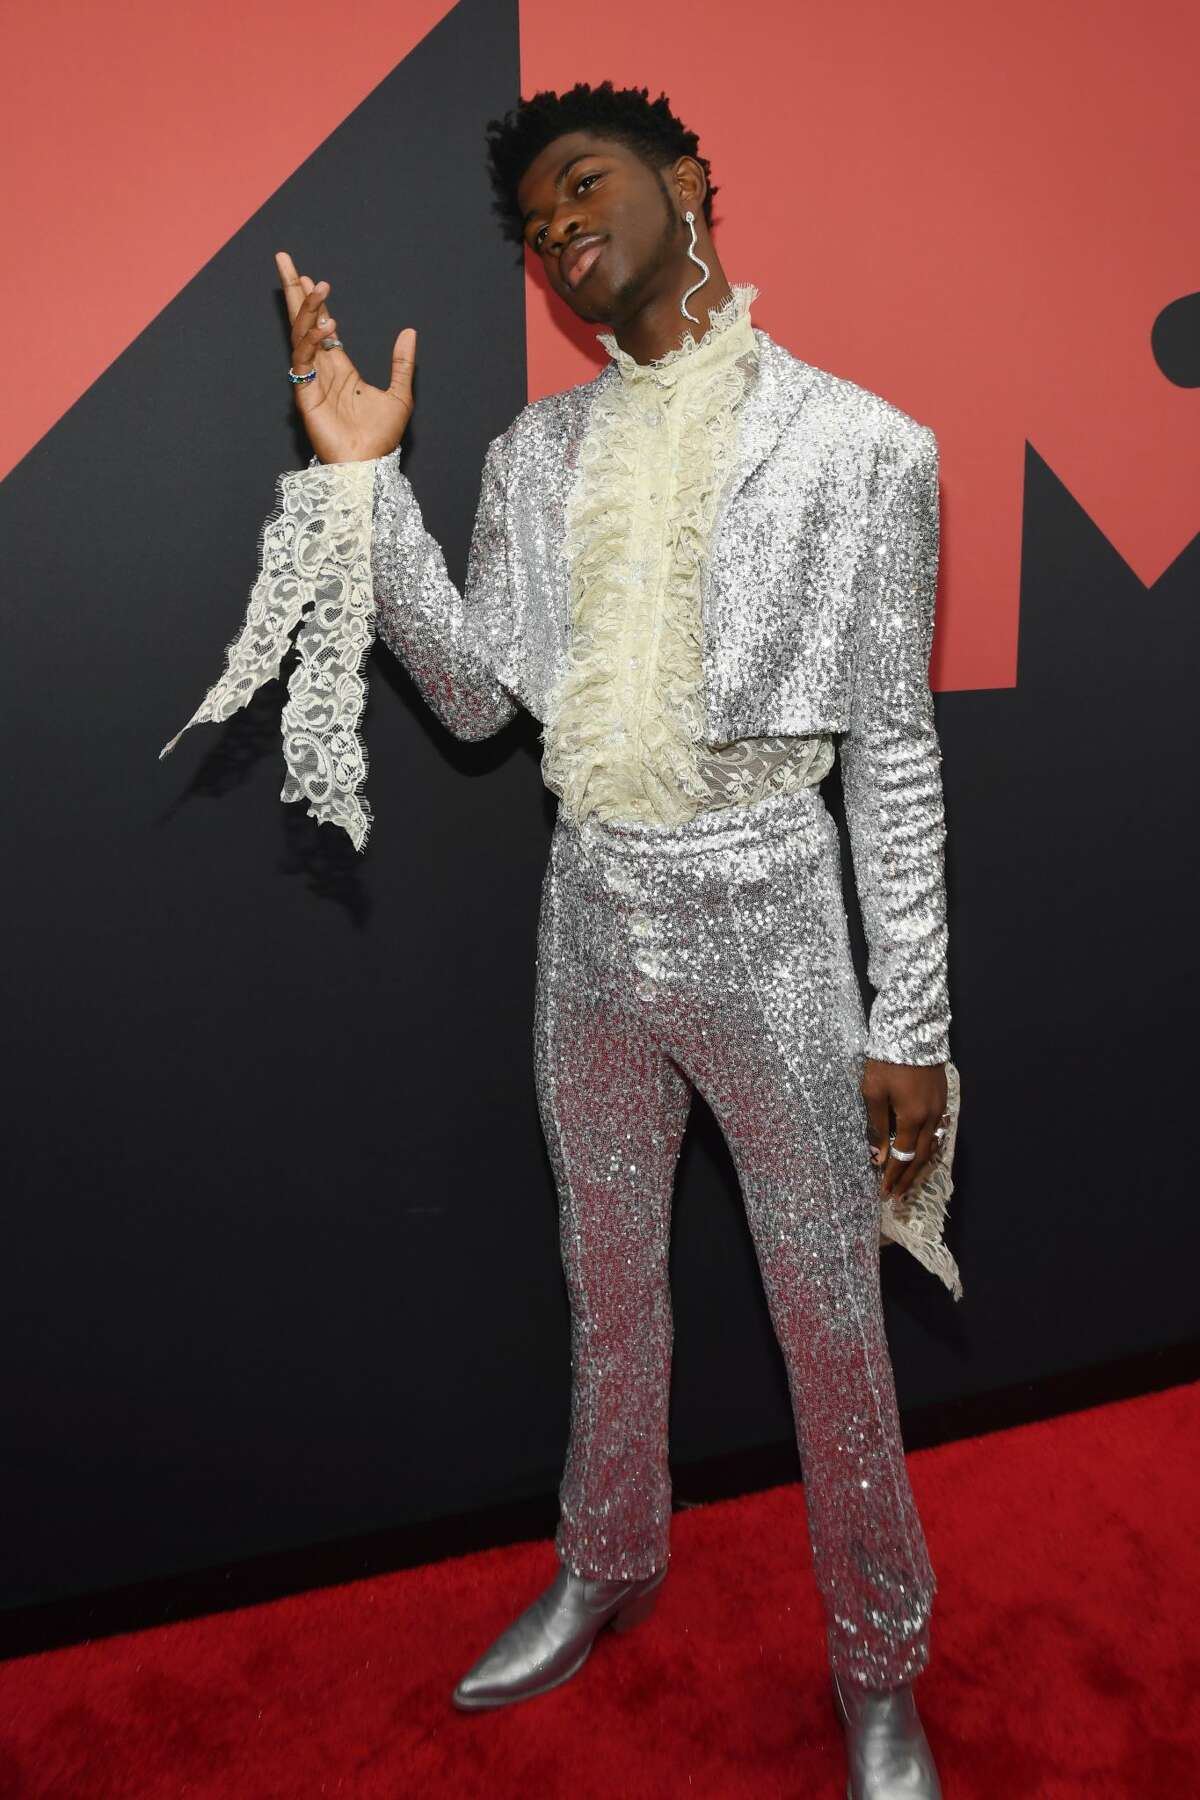 Lil Nas X attends the 2019 MTV Video Music Awards at Prudential Center on August 26, 2019 in Newark, New Jersey. (Photo by Kevin Mazur/WireImage)